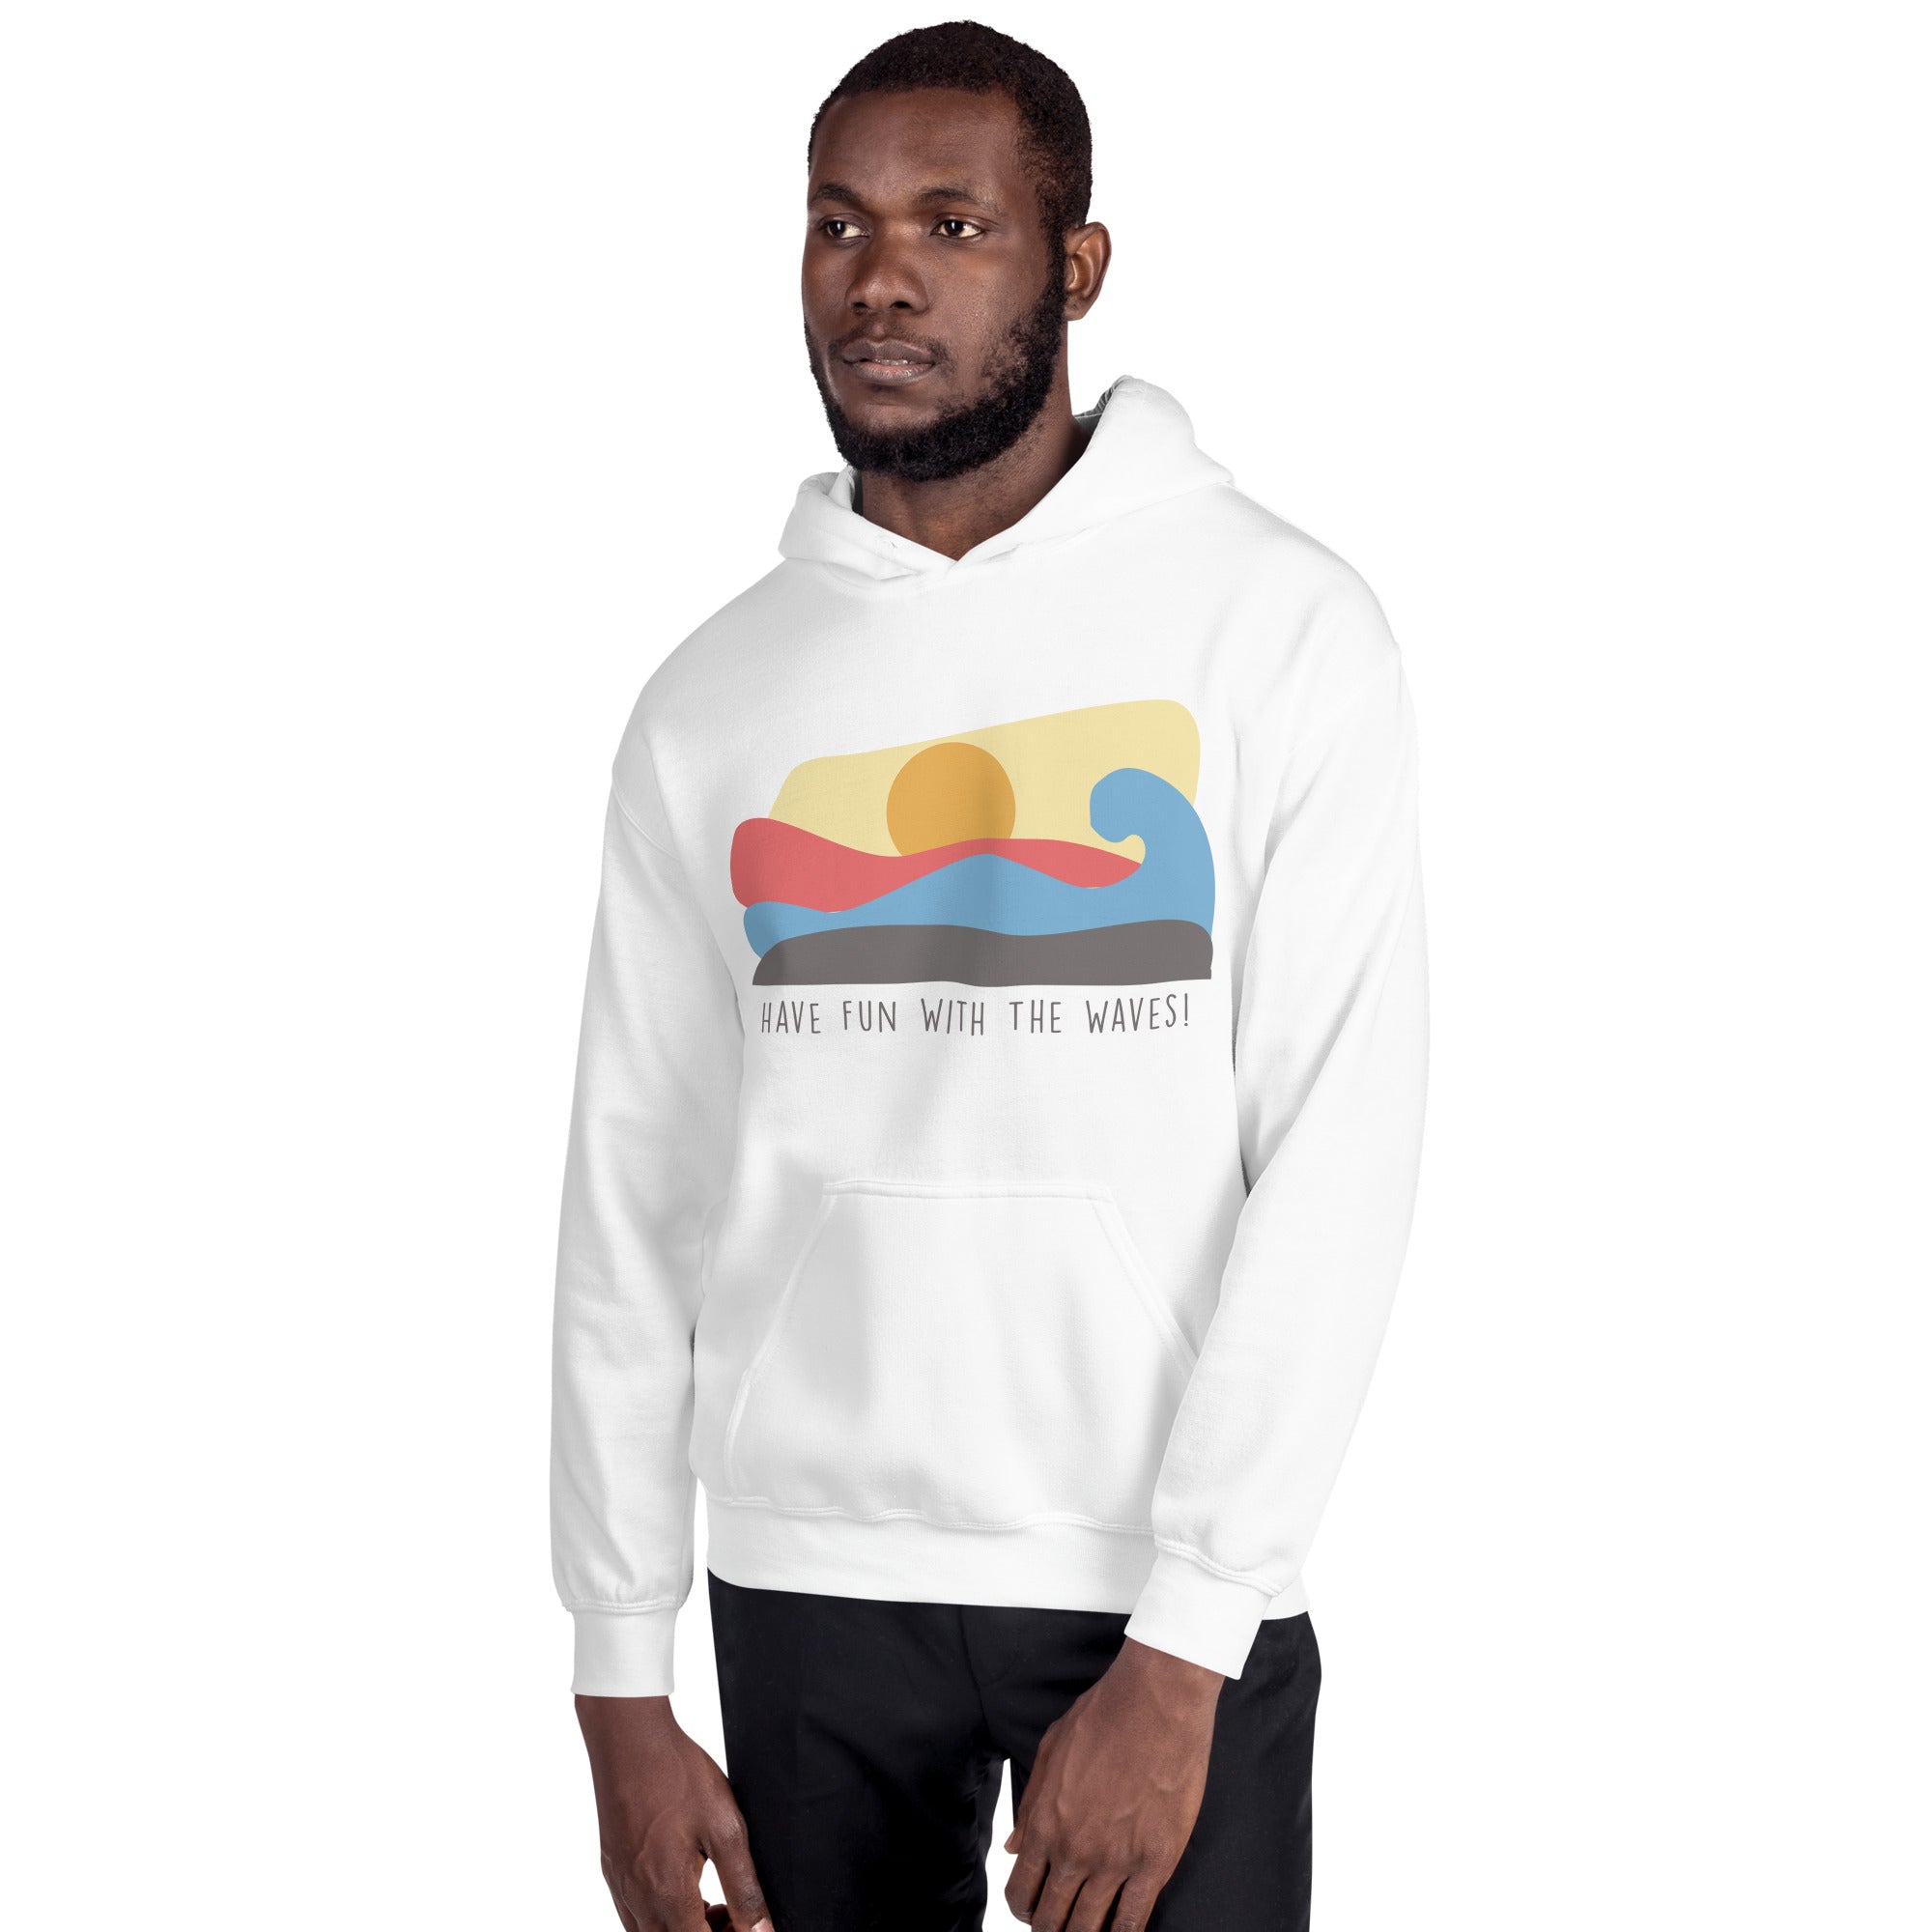 Have Fun With The Waves - Unisex Hoodie